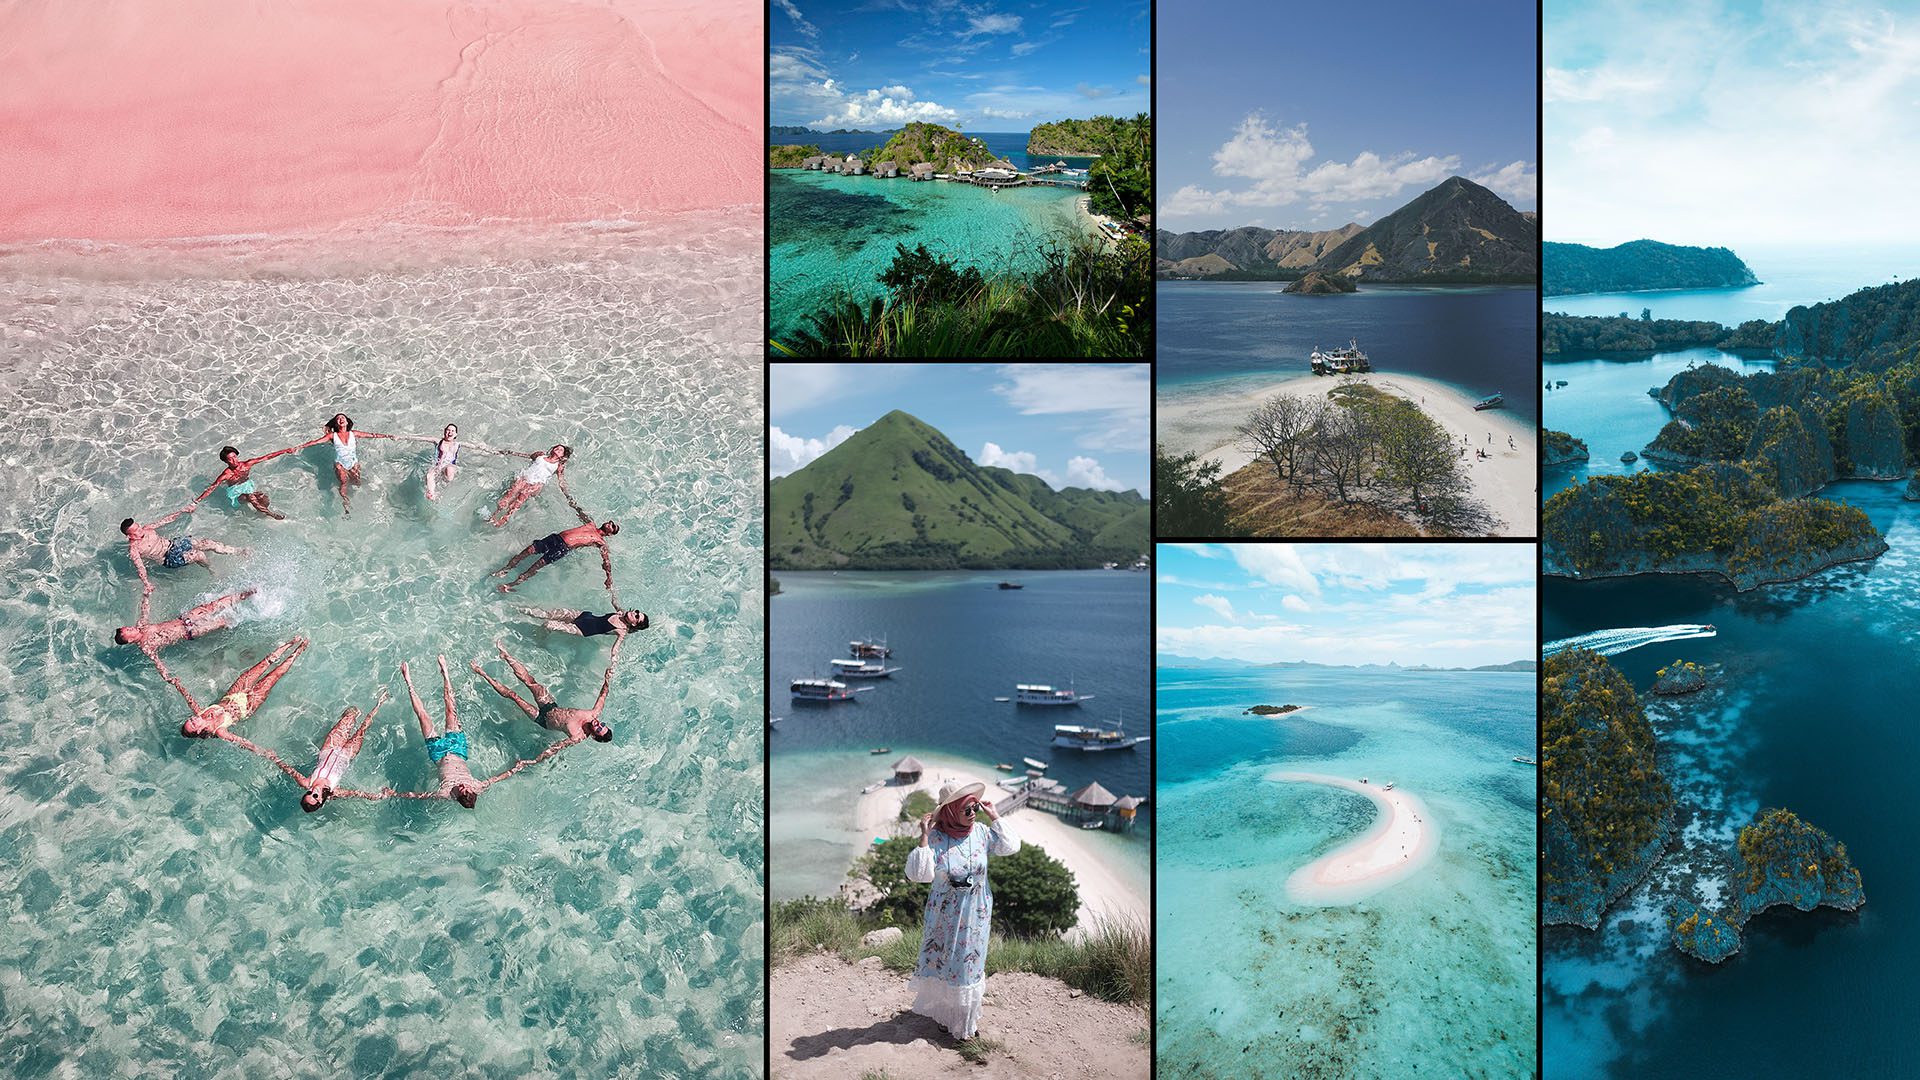 6 Exquisite Indonesian Islands You Need To Visit